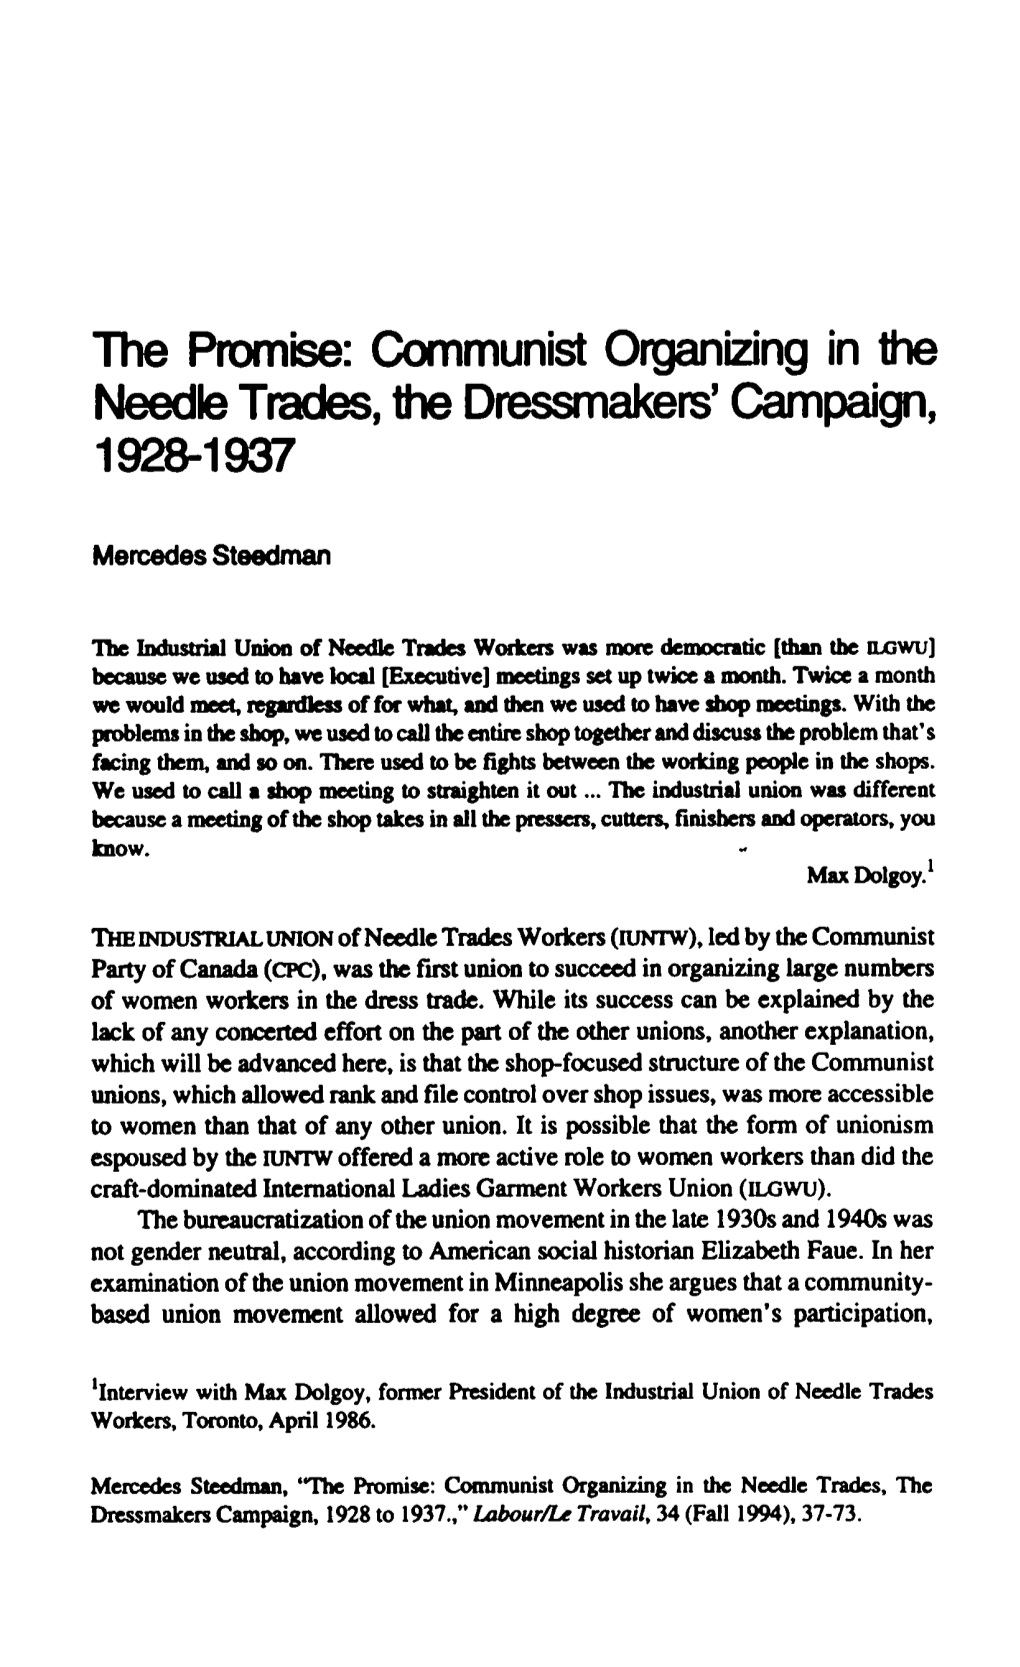 Communist Organizing in the Needle Trades, the Dressmakers' Campaign, 1928-1937